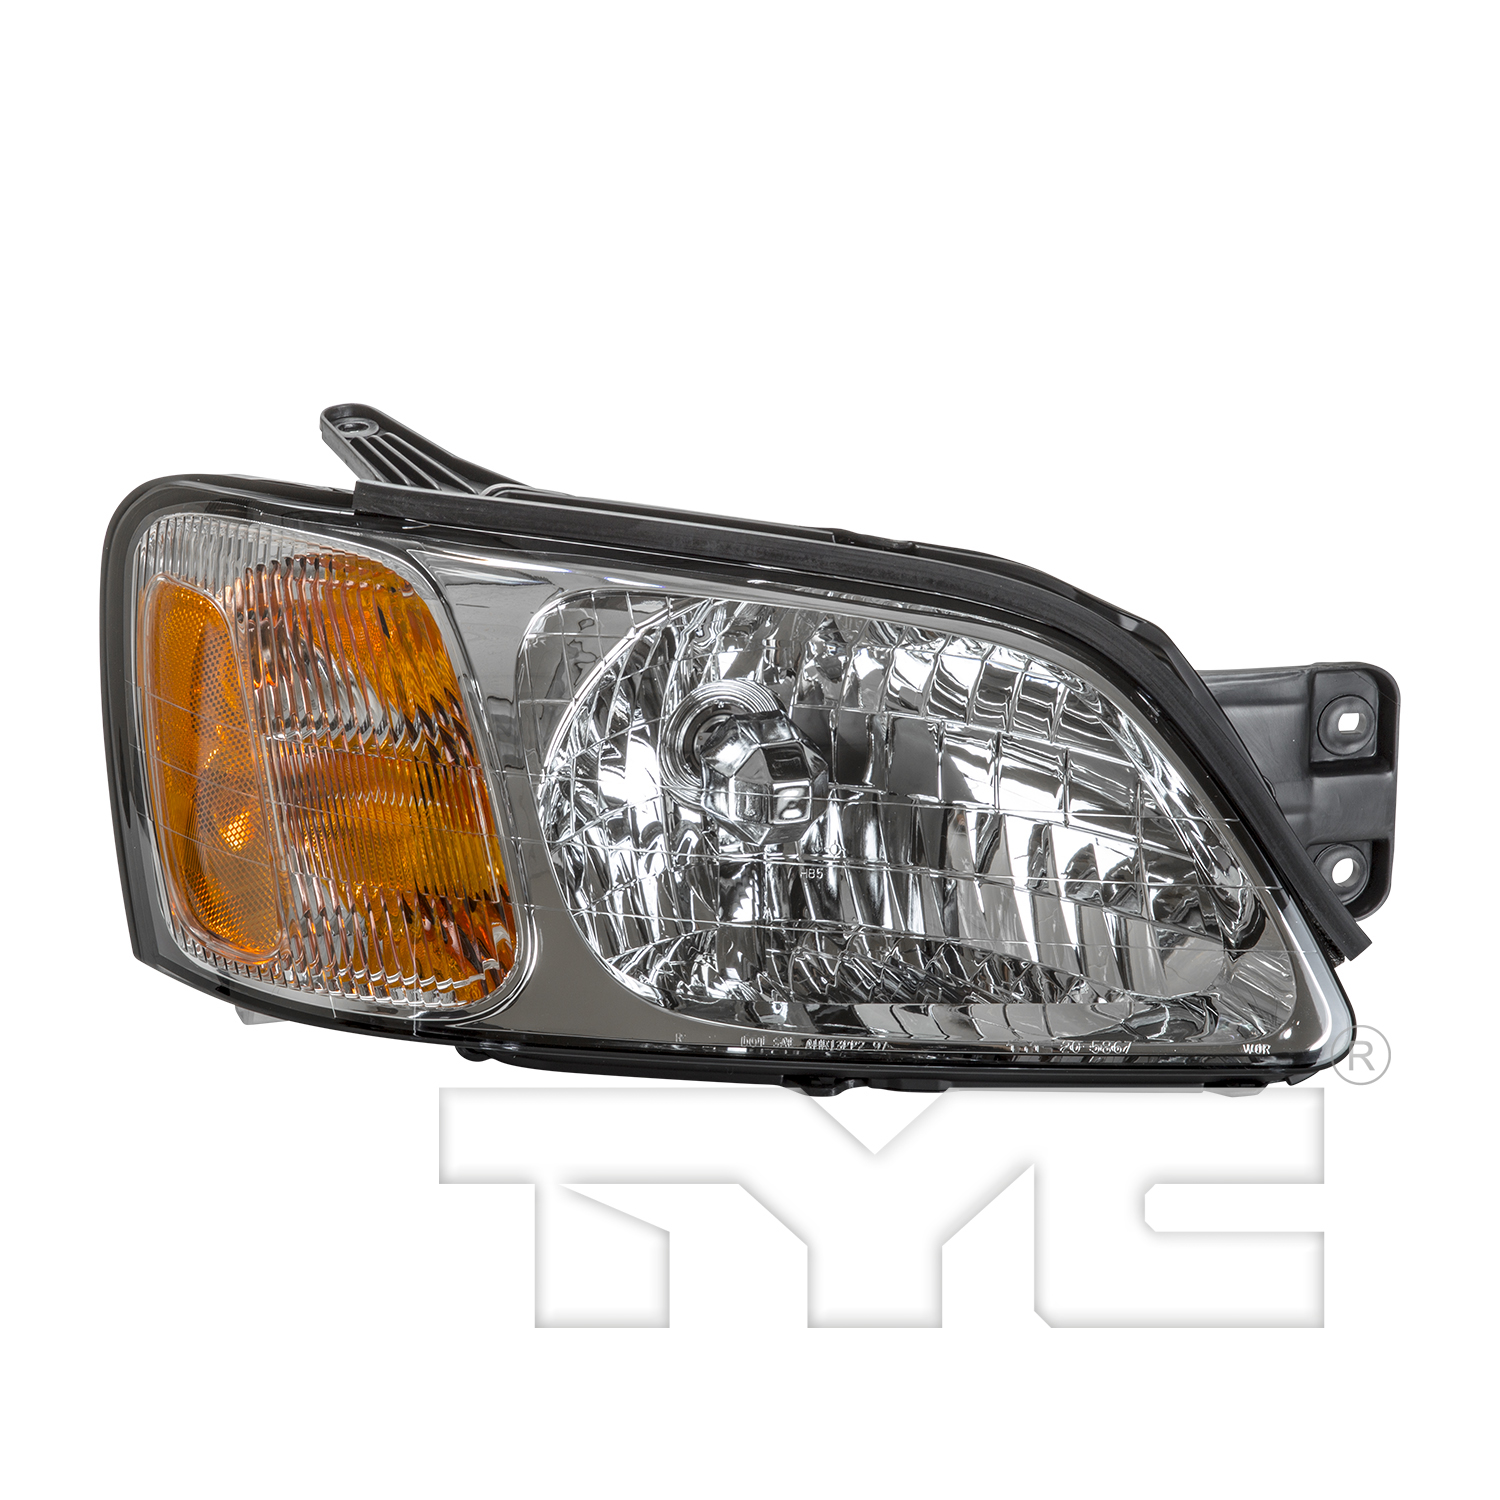 Aftermarket HEADLIGHTS for SUBARU - LEGACY, LEGACY,00-04,RT Headlamp assy composite